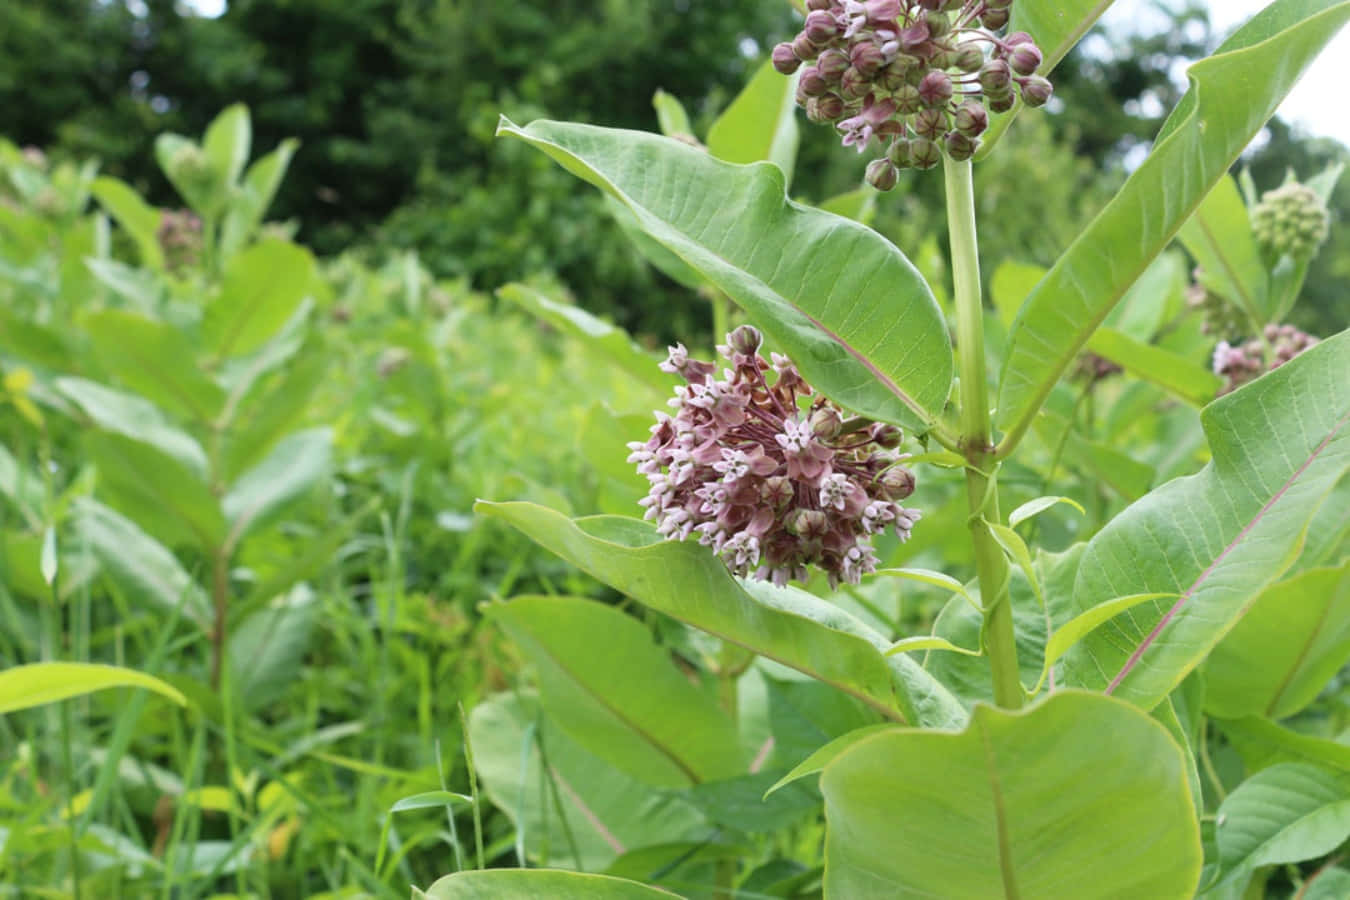 A field of Milkweed brings beauty and sustenance to the local wildlife.